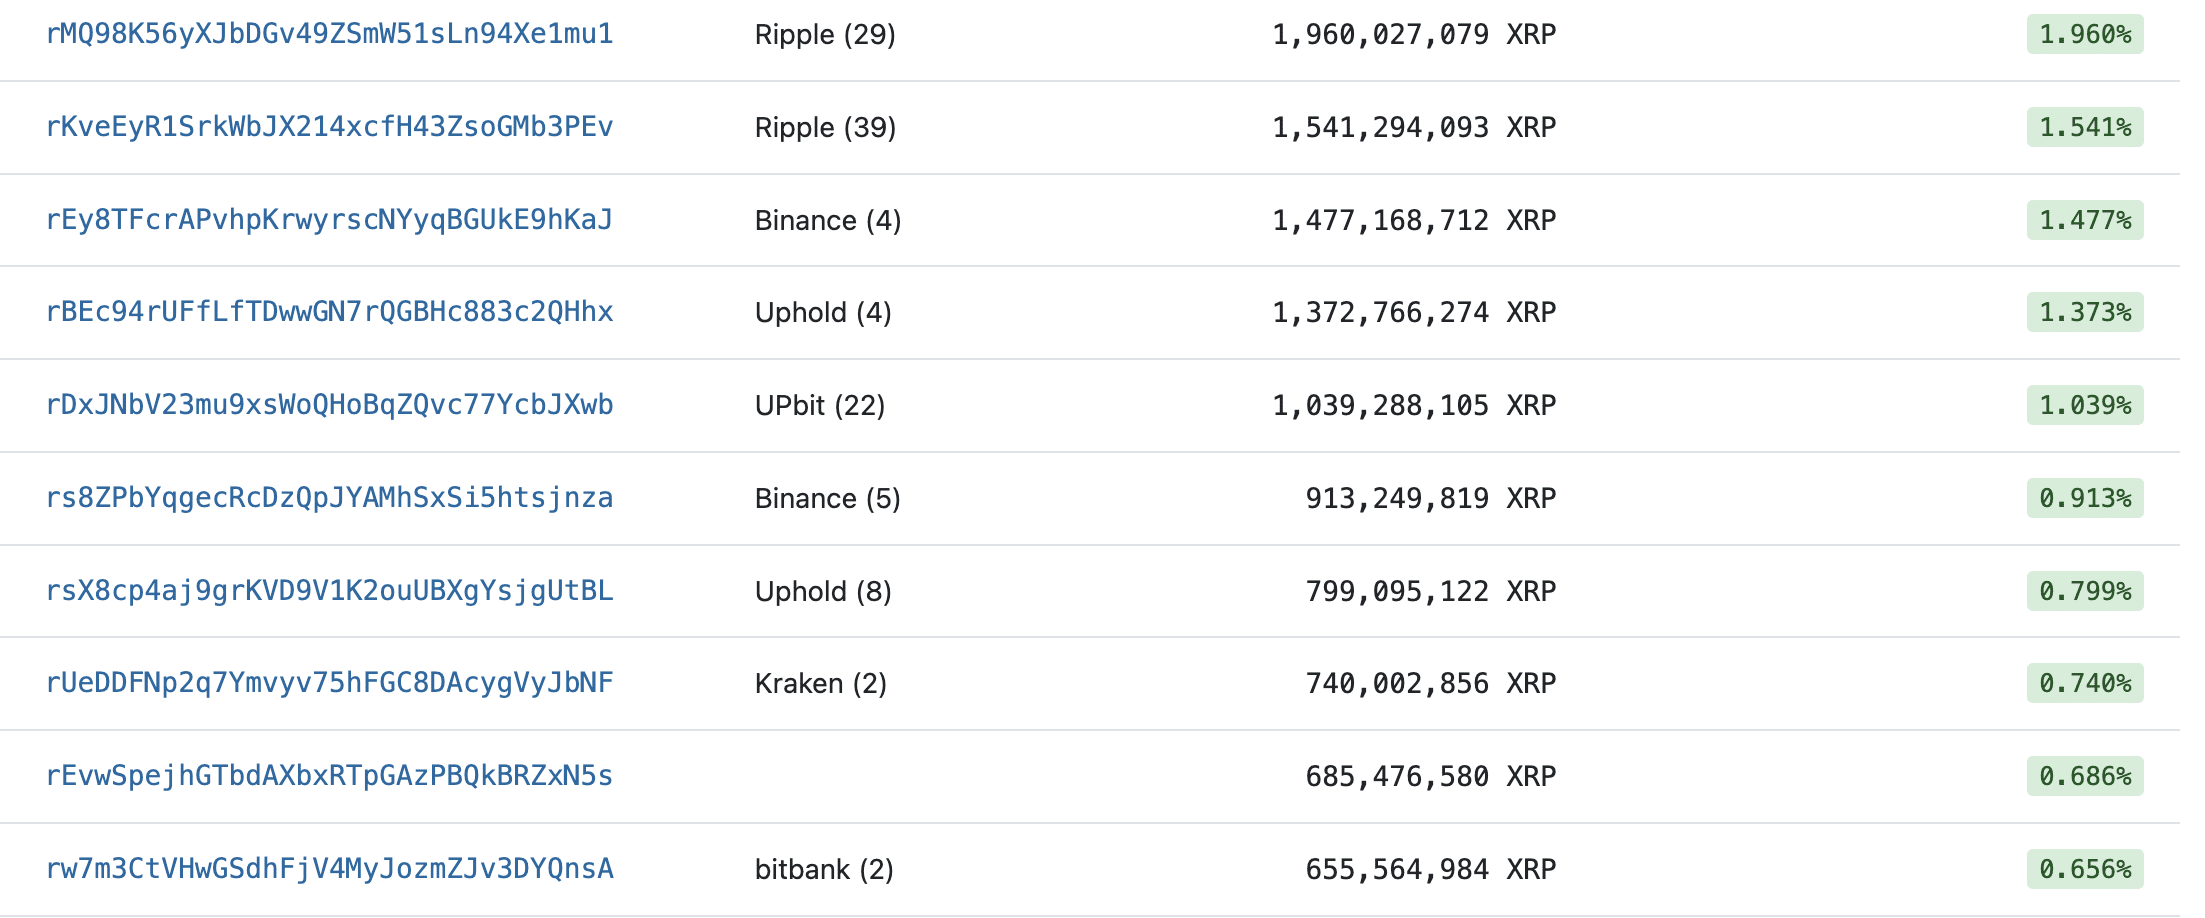 XRP Rich List Who Are The Top 10 Largest XRP Holders?